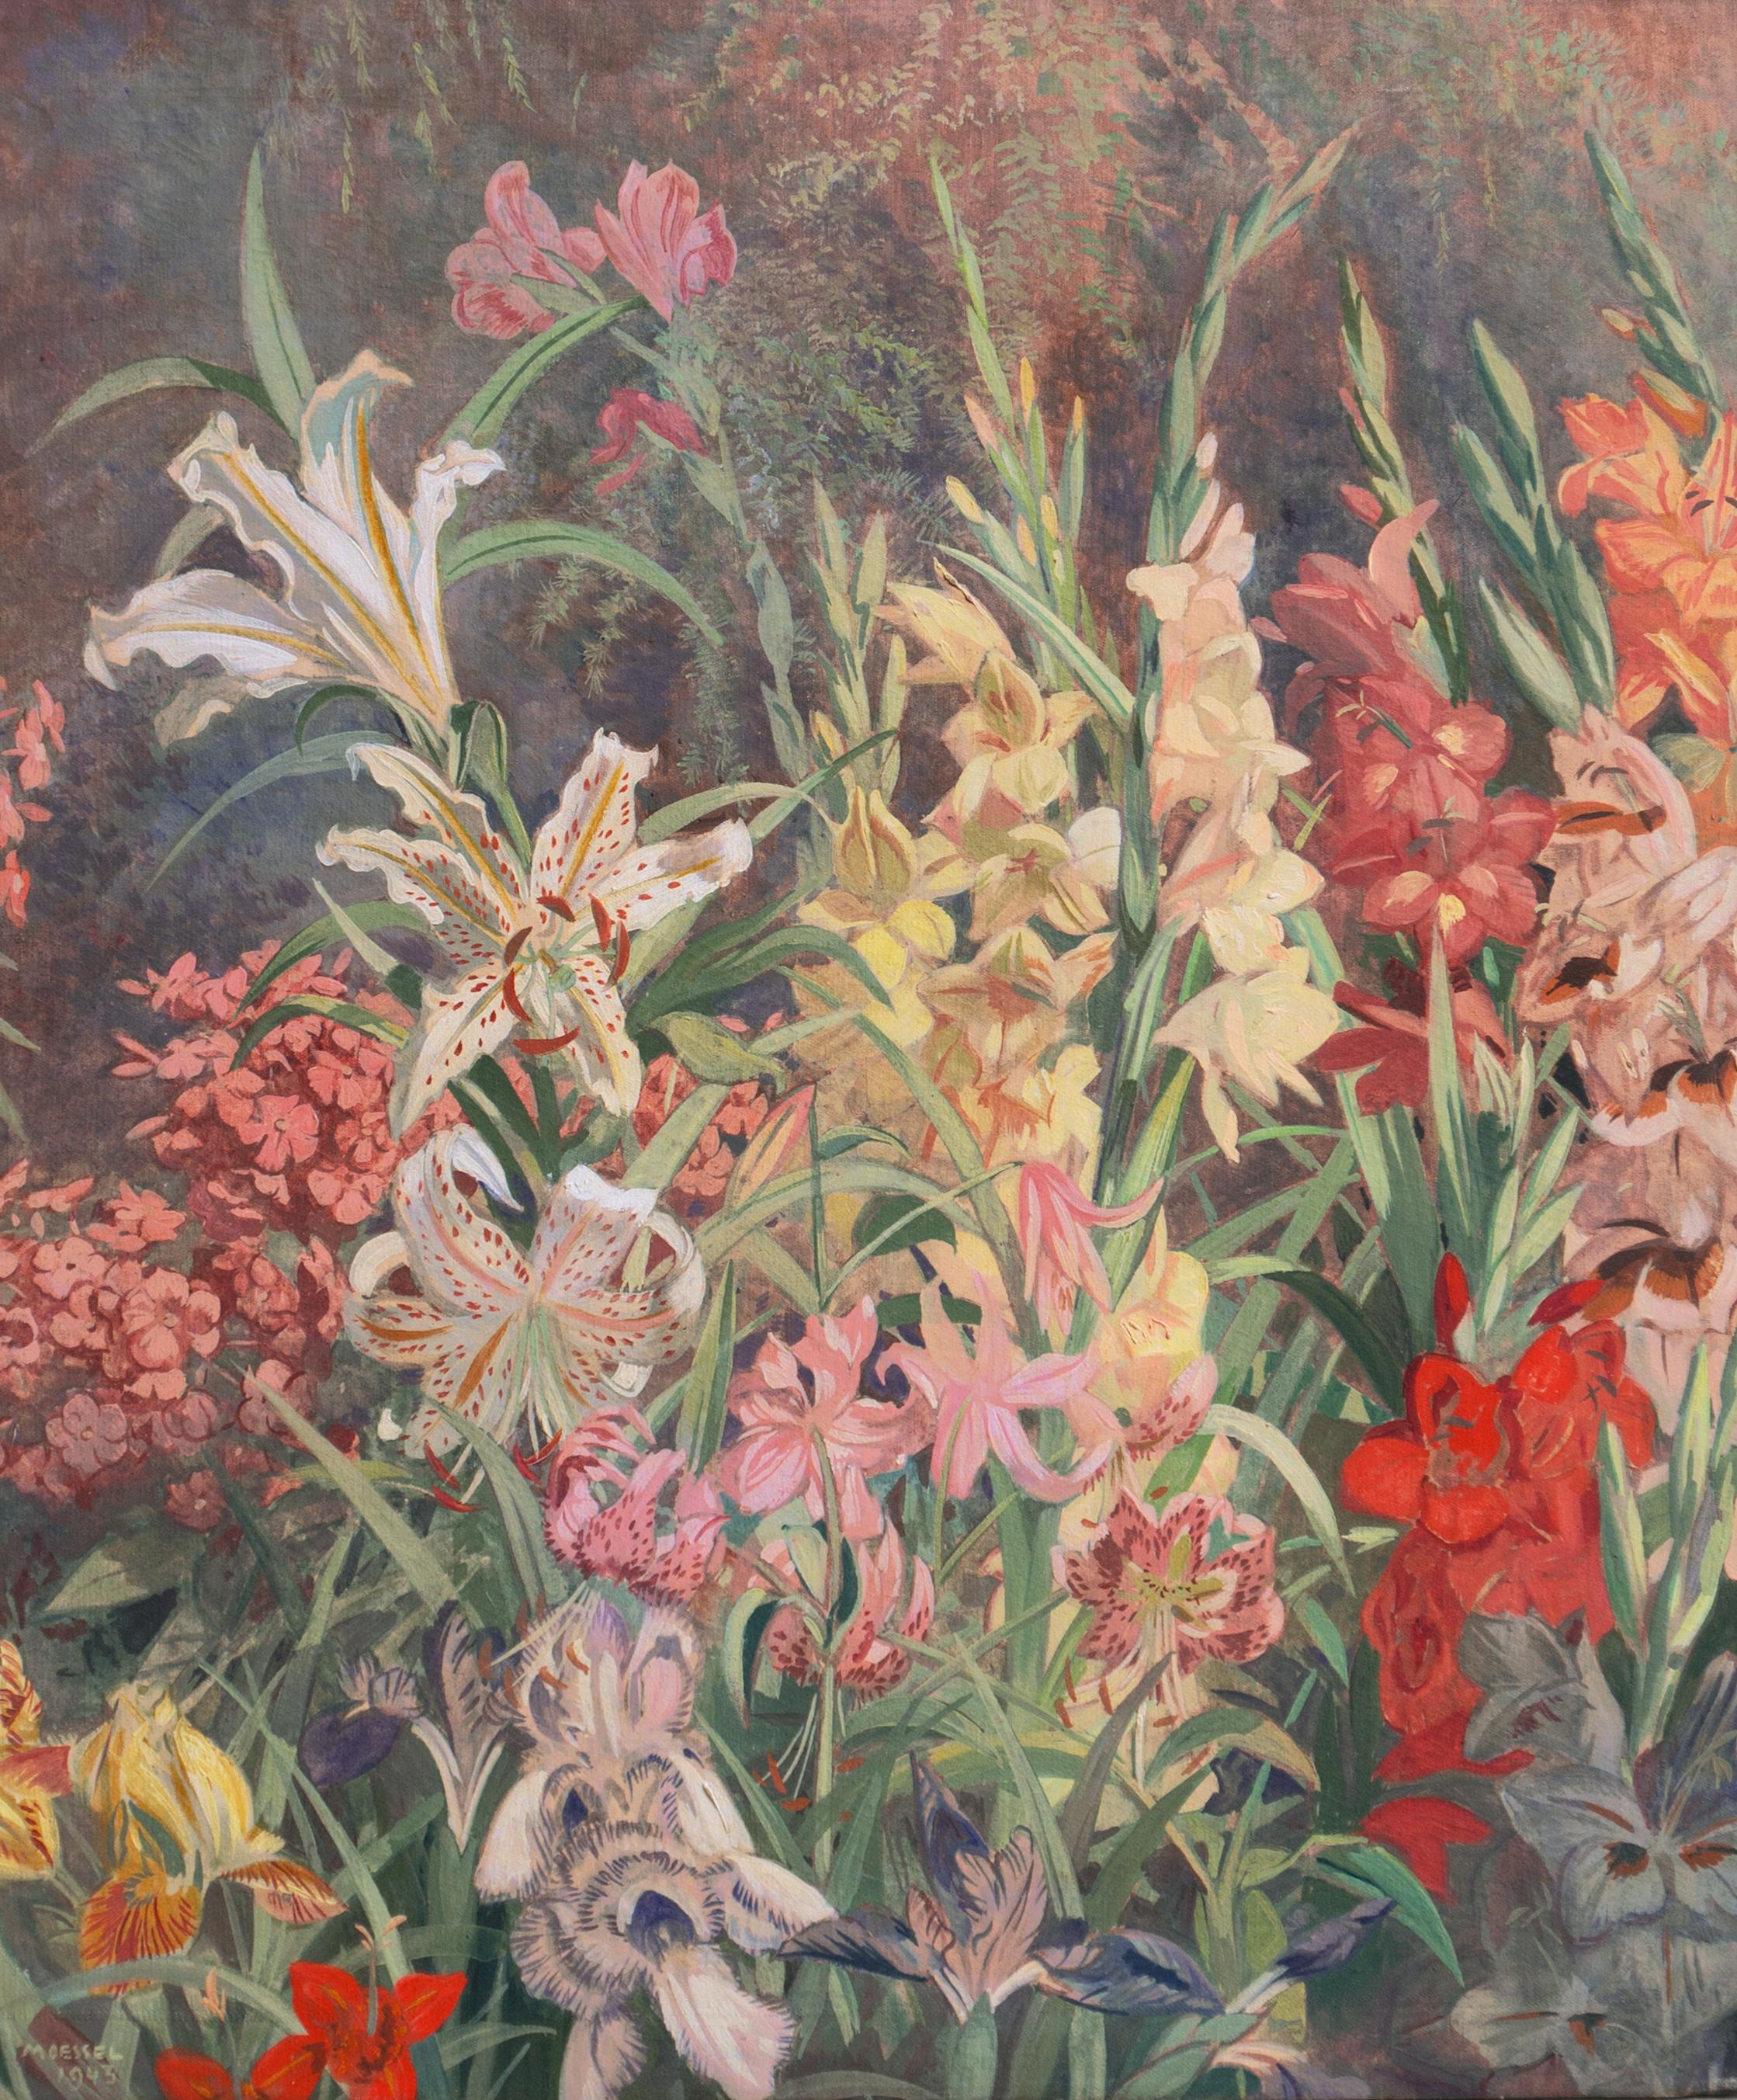 Signed lower left 'Moessel' for Julius Moessel (American, 1872-1960) and dated 1943; additionally titled verso, 'In the Artist's Garden'.

A substantial, mid-century horticultural oil showing a profusion of summer flowers including lilies and lupins